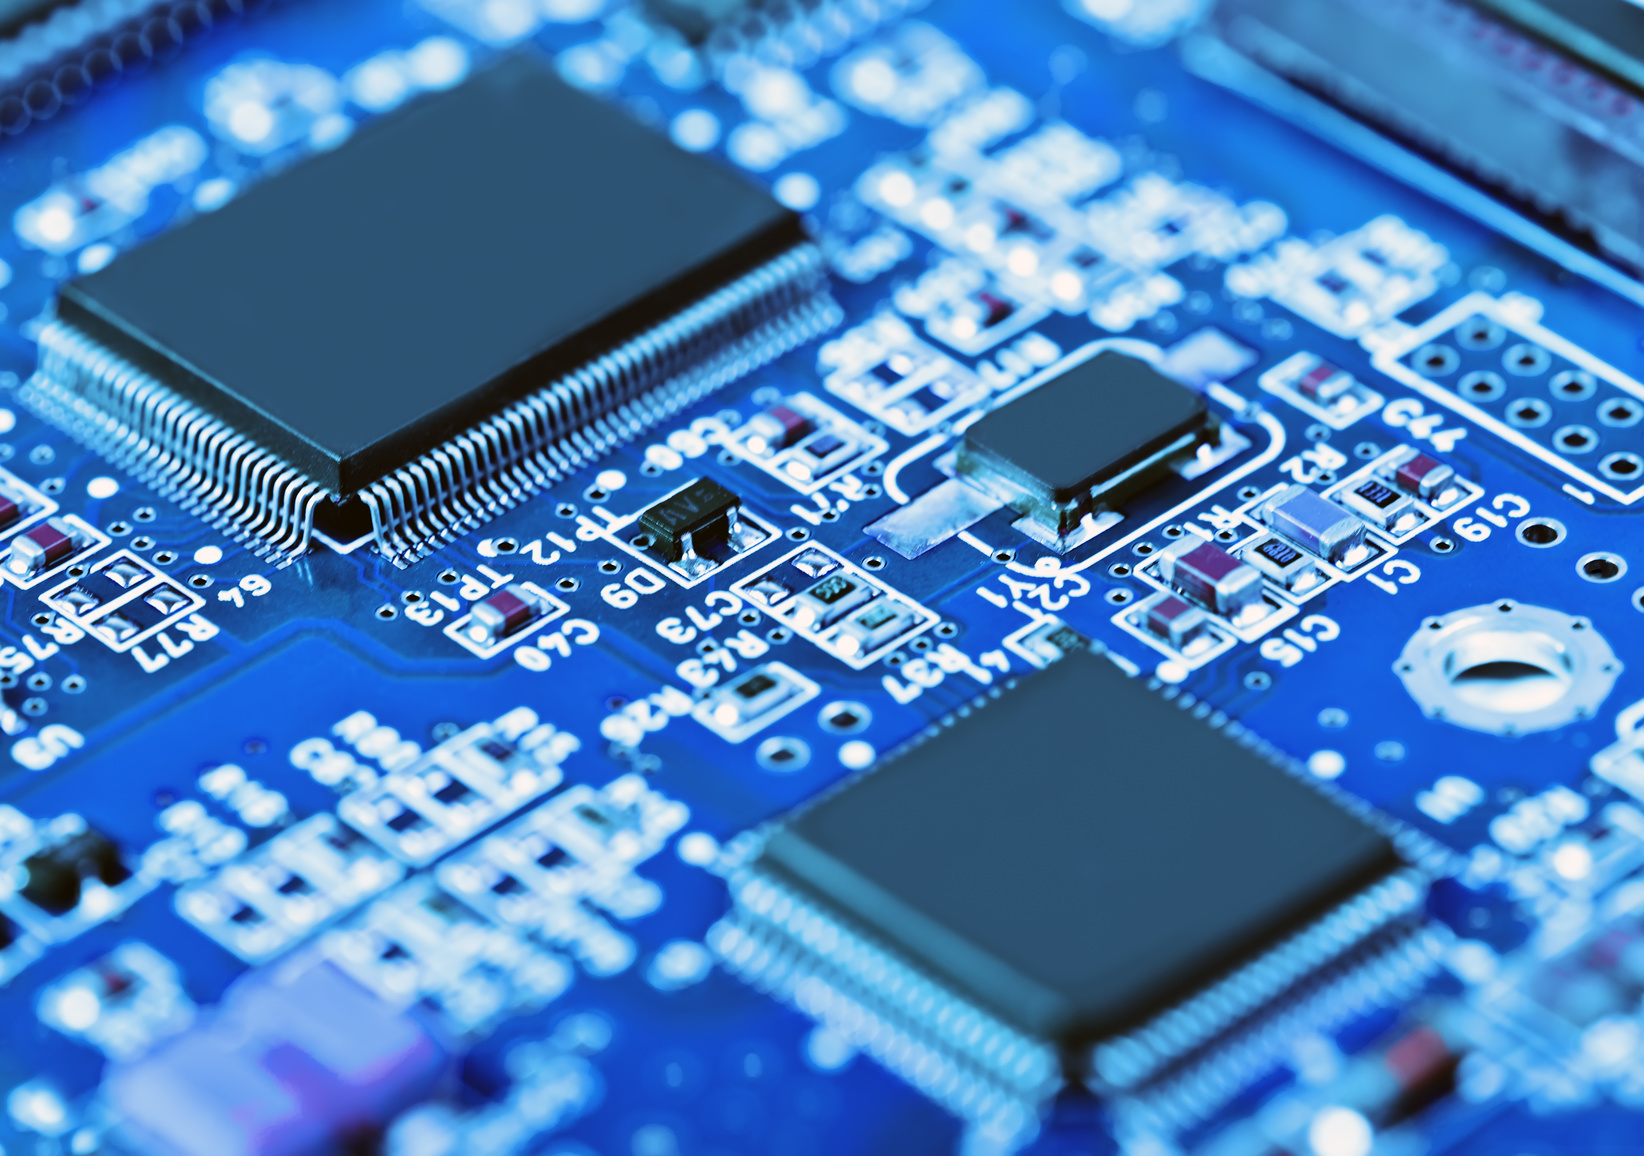 What is your go-to source for electronic components? - Technical